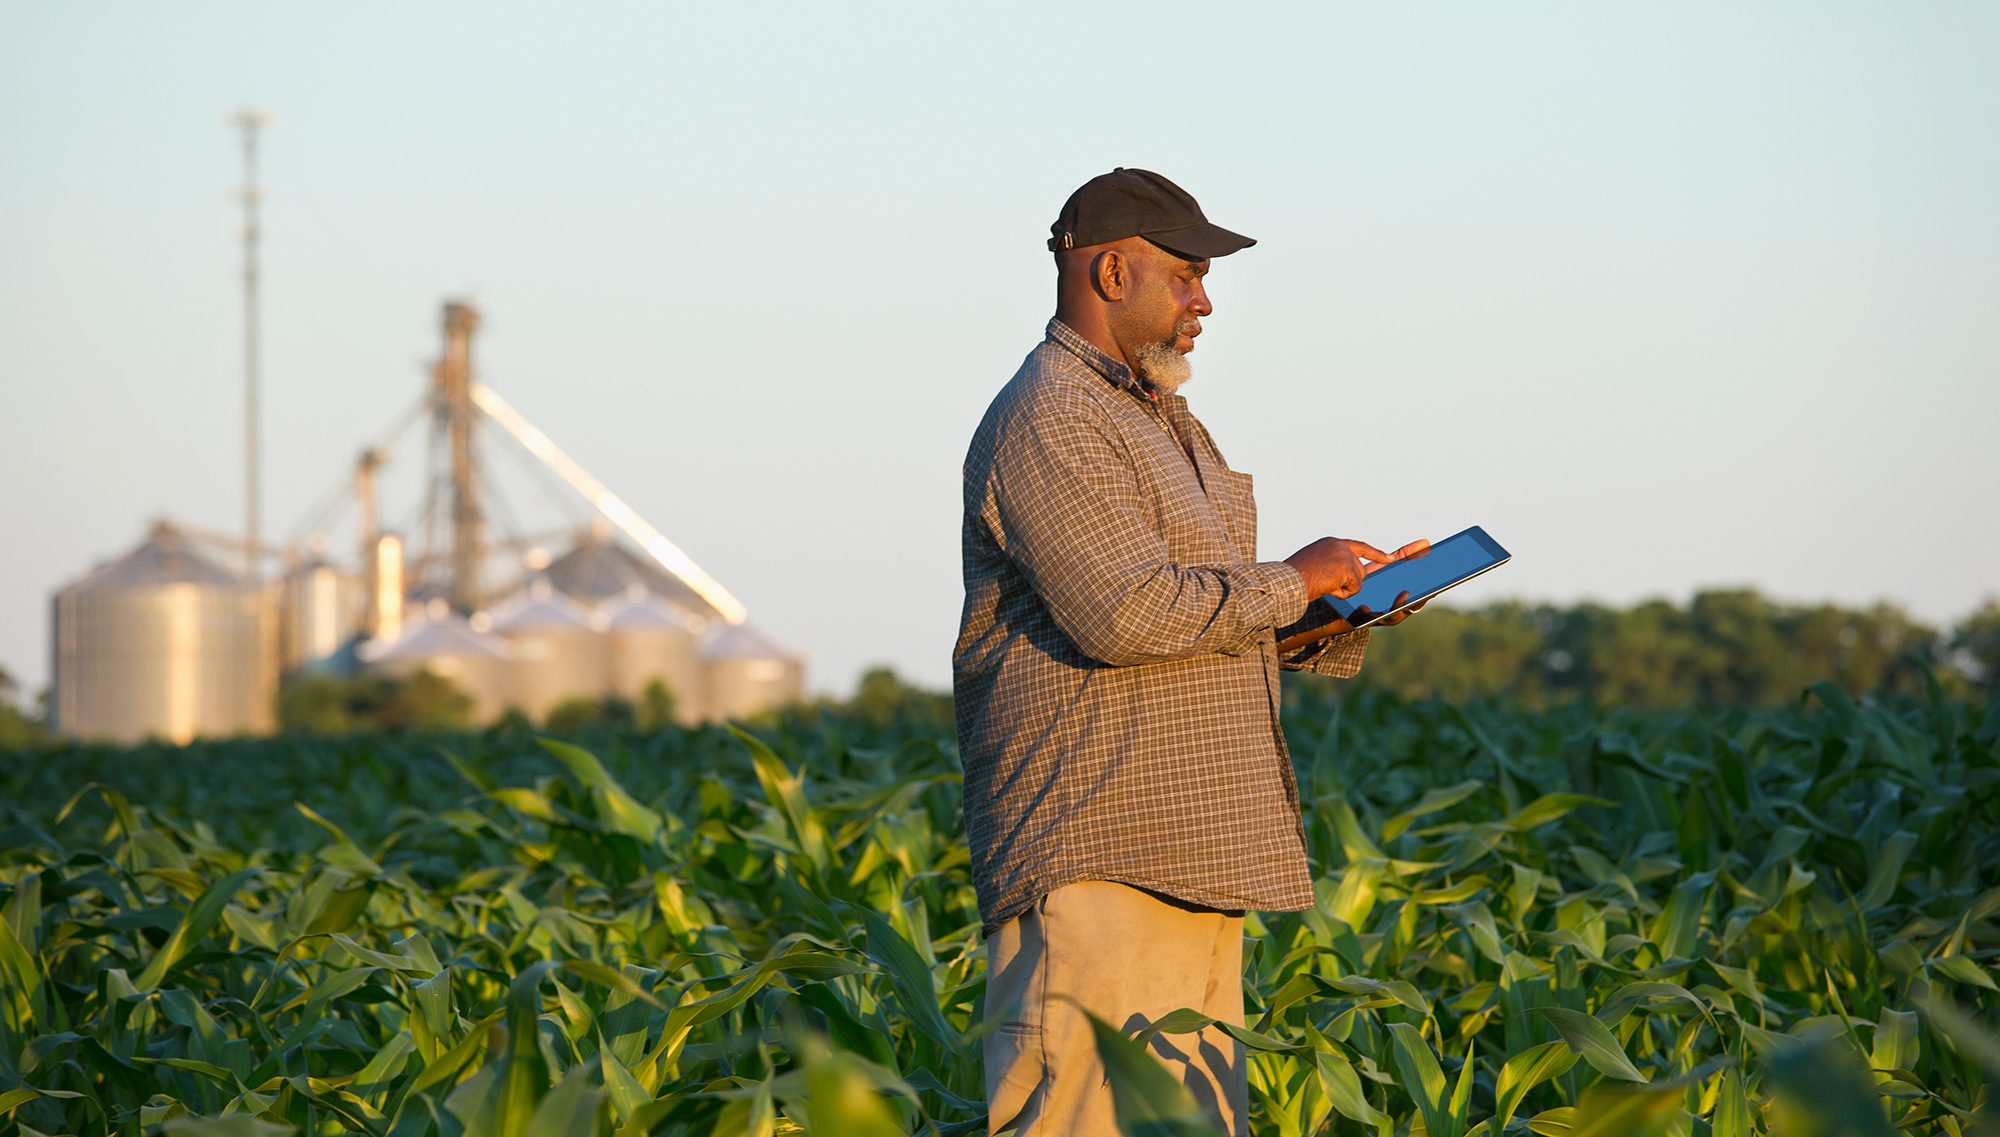 Getty Images: 463245219 Caption: Farmer with digital tablet in crop field. Credit: Ariel Skelley / DigitalVision / Getty Images.